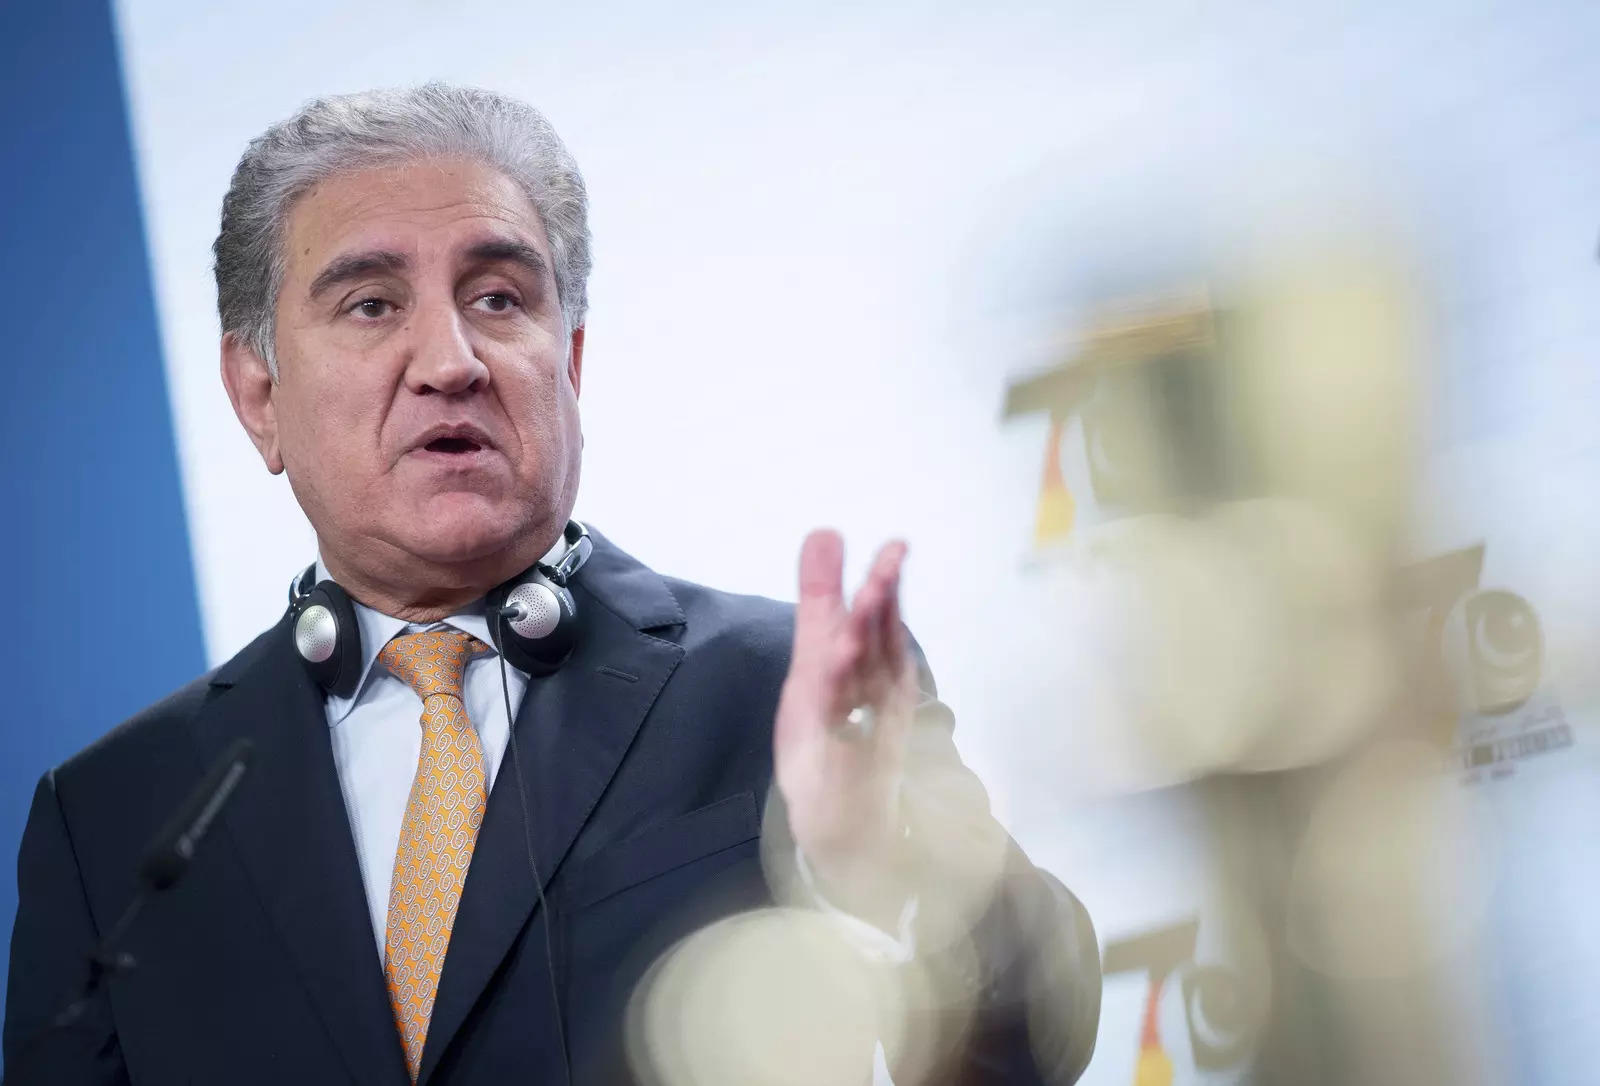 Berlin: Makhdoom Shah Mahmood Qureshi, foreign minister of Pakistan, gestures during a press conference together with Heiko Maas, German foreign minister, at the Federal Foreign Office in Berlin, Germany. AP/PTI(